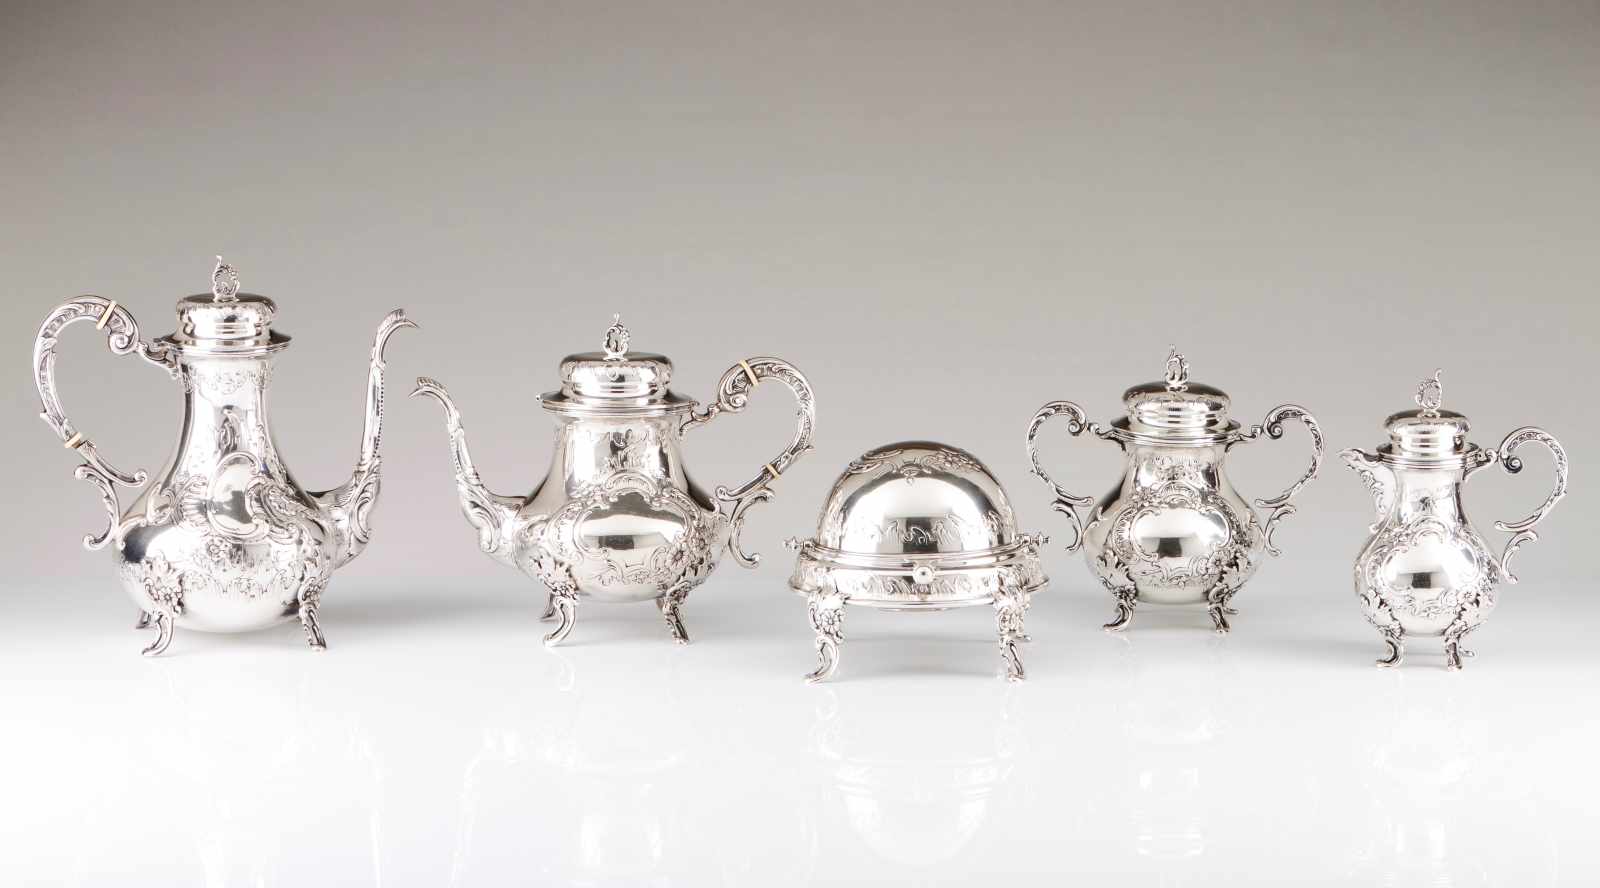 A Belle-Époque coffee and tea setPortuguese silver of the late 19th, early 20th centuryDecorated